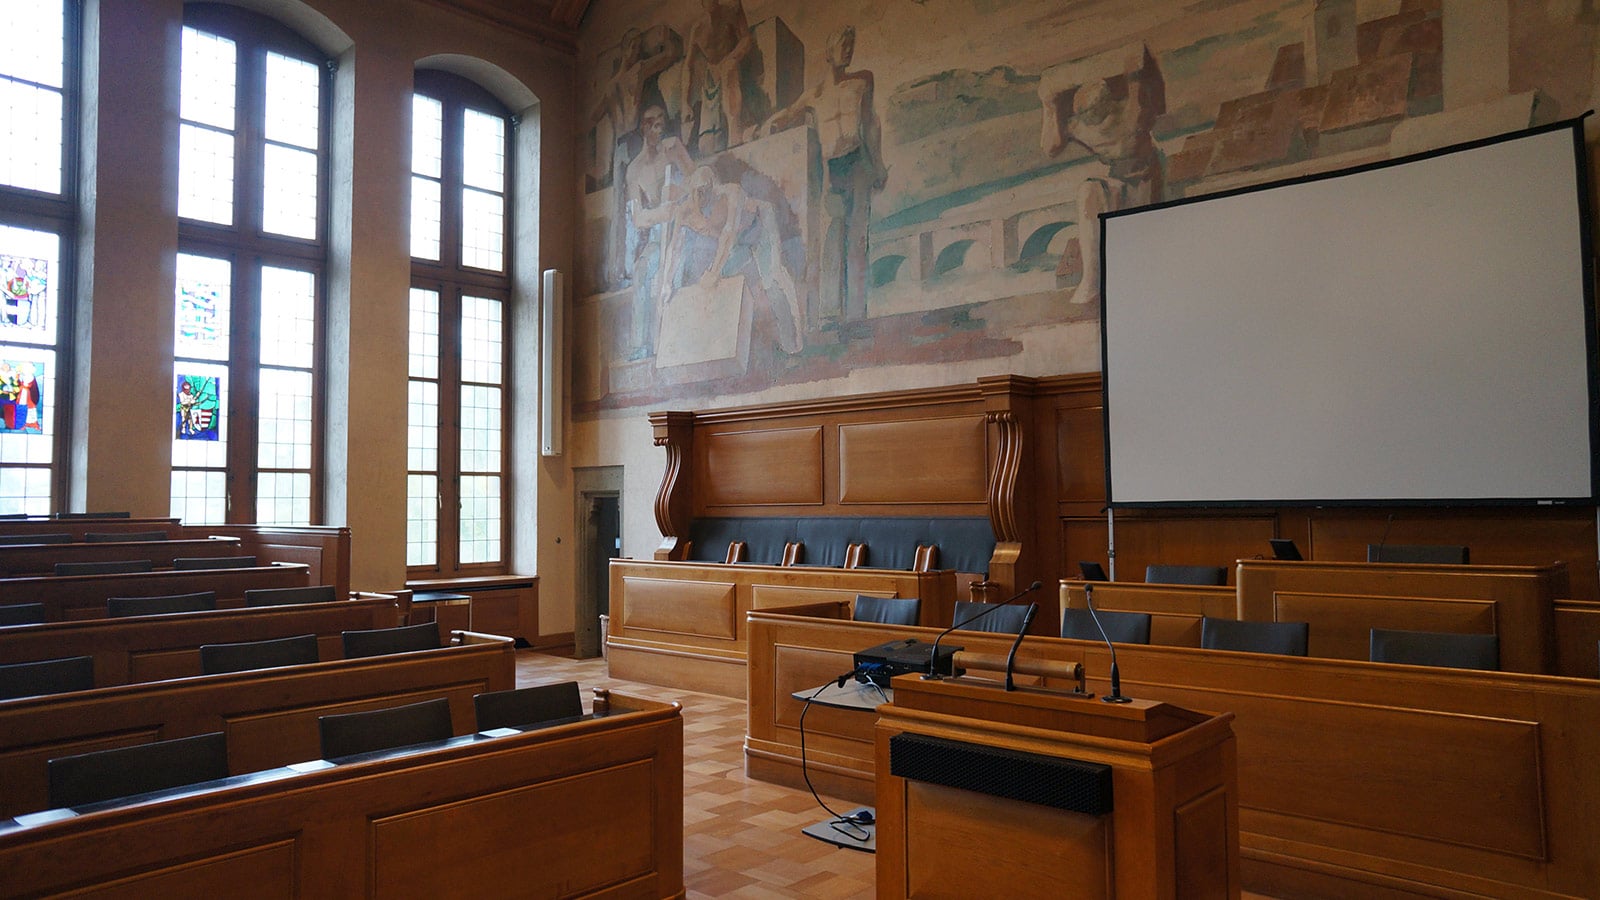 Cutting through Reverberation: Meyer Sound CAL at 15th Century Swiss Parliament Hall